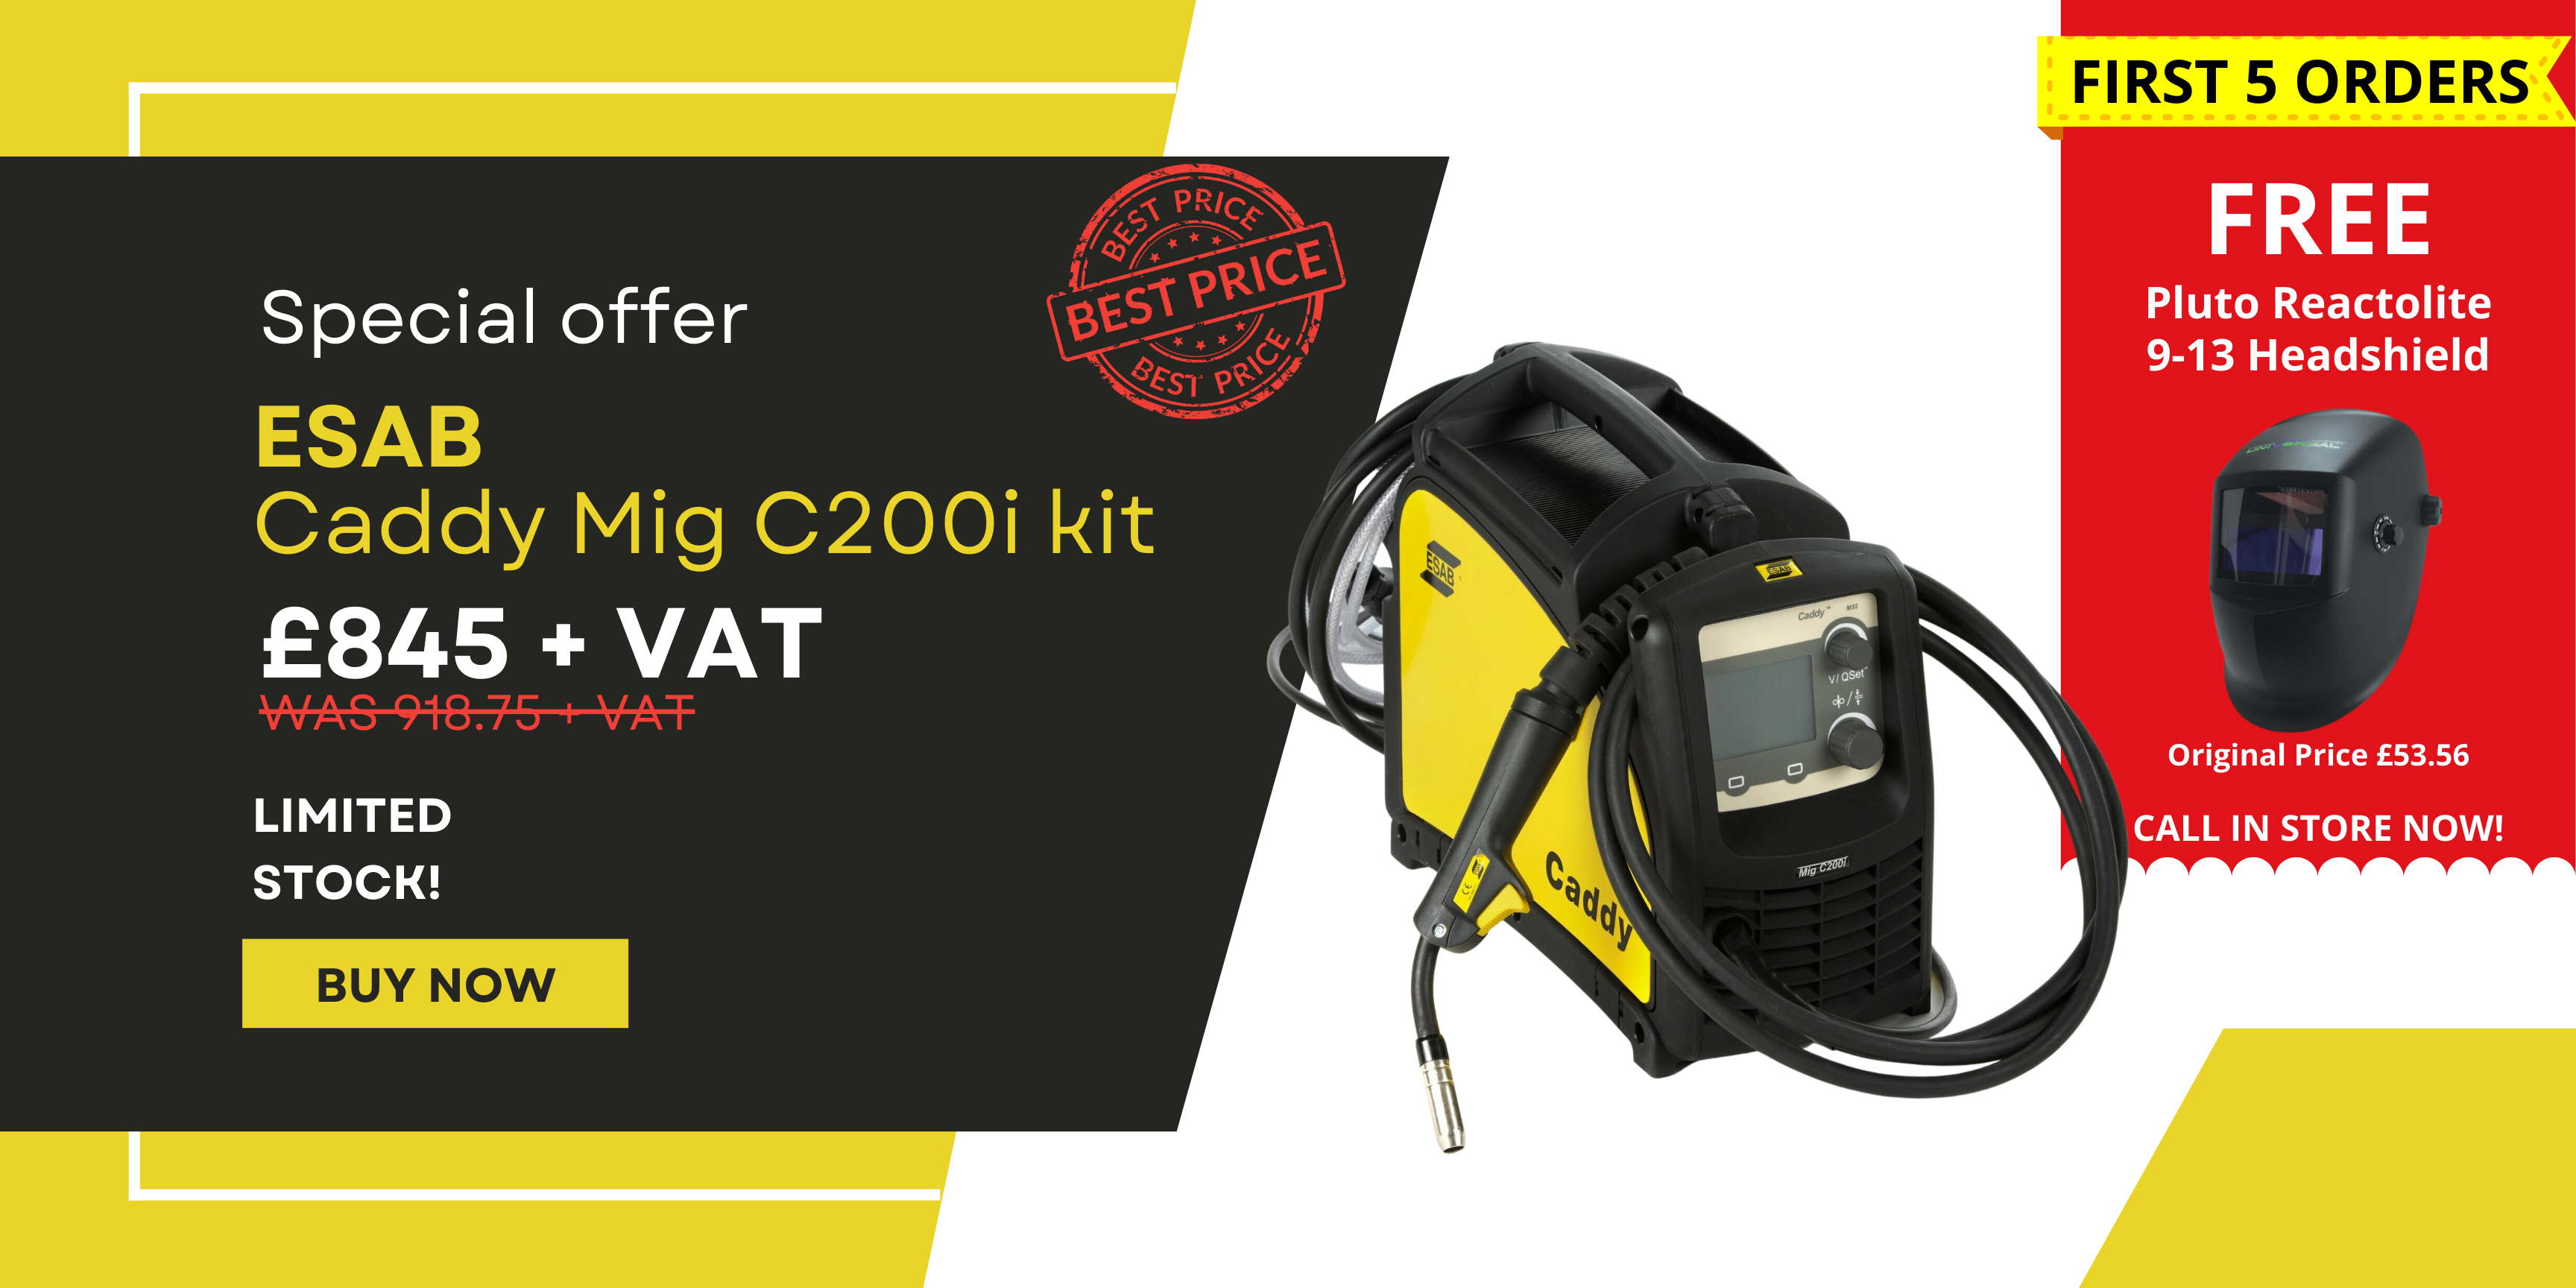 Image offer for an ESAB Caddymig C200i kit including a free Helmet